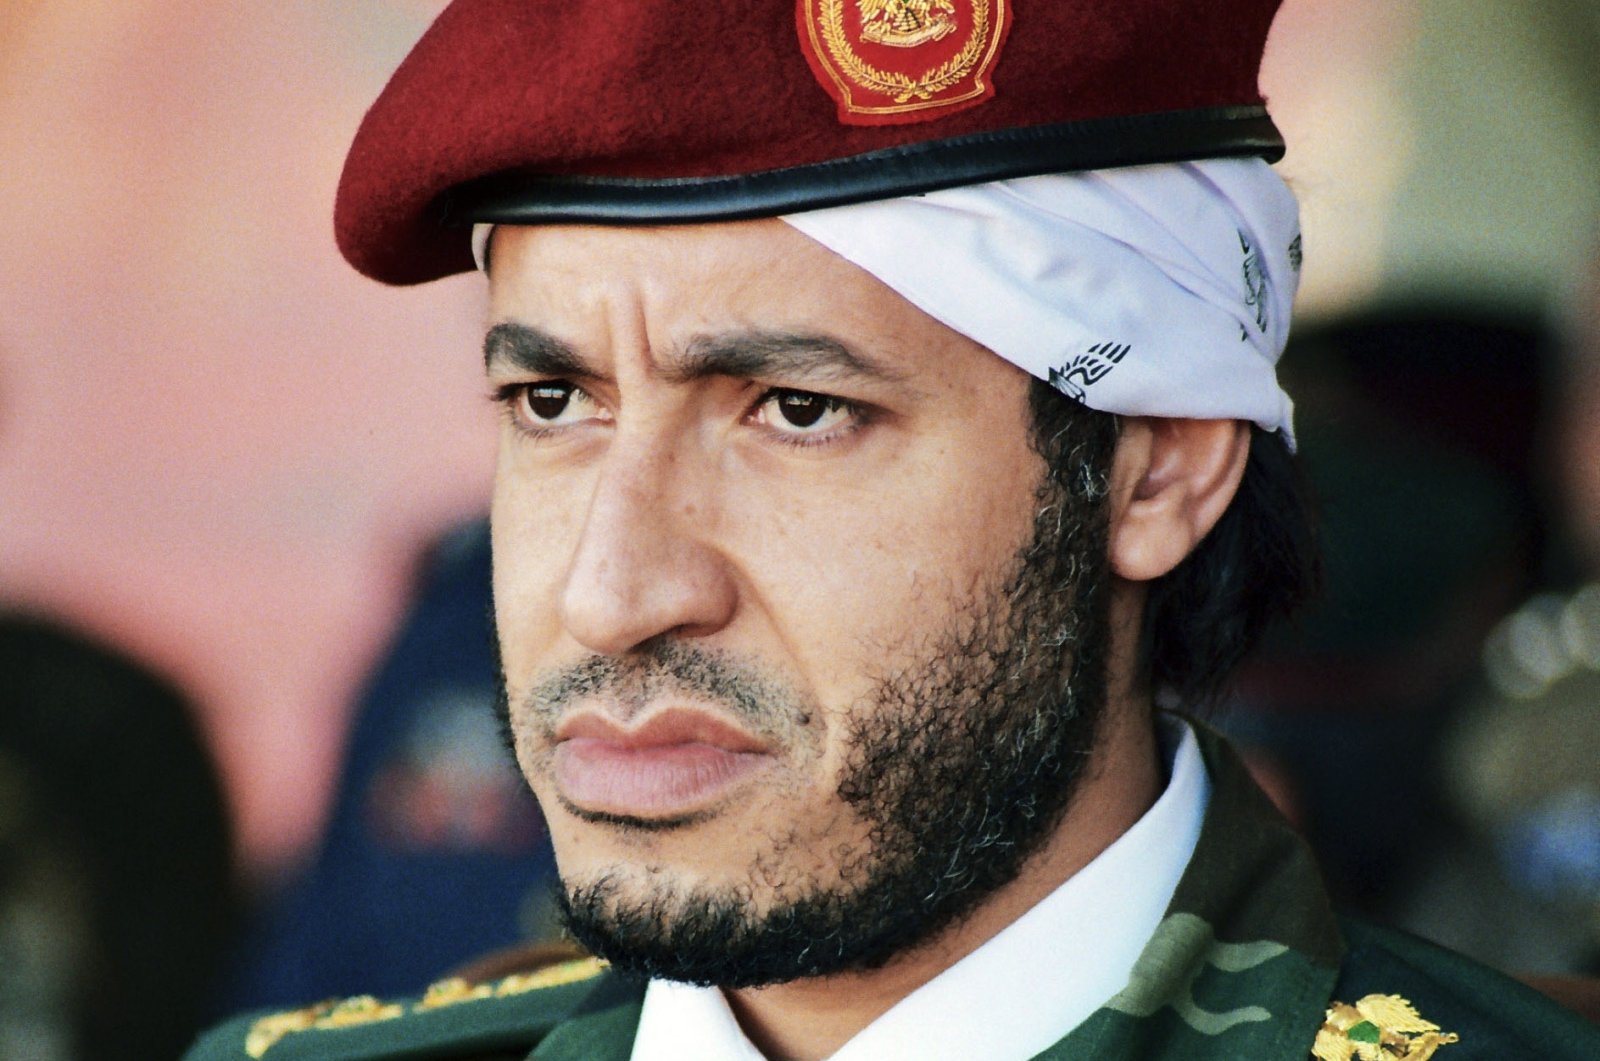 Saadi Gadhafi, son of the late Libyan leader Moammar Gadhafi, watches a military exercise by the elite military unit commanded by his brother, Khamis, in Zlitan, Libya, in this undated file photo made available Sept. 25, 2011. (AP Photo)